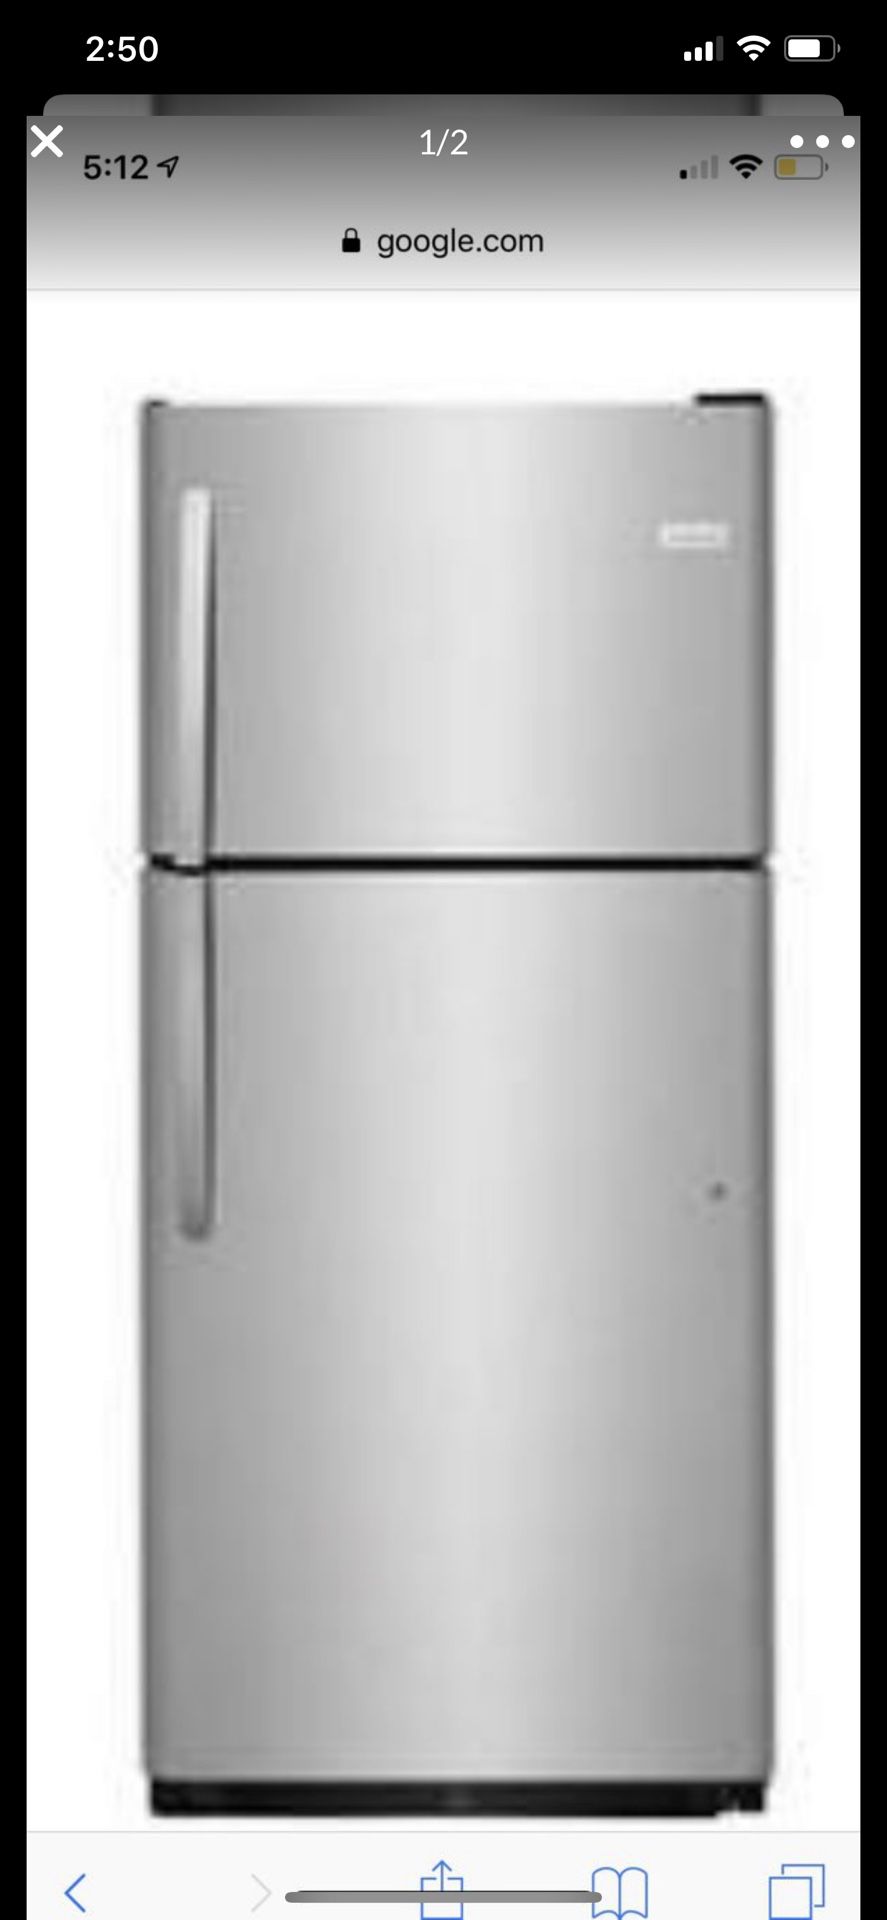 Bought this fridge for 900 selling for 85 absolute steal!